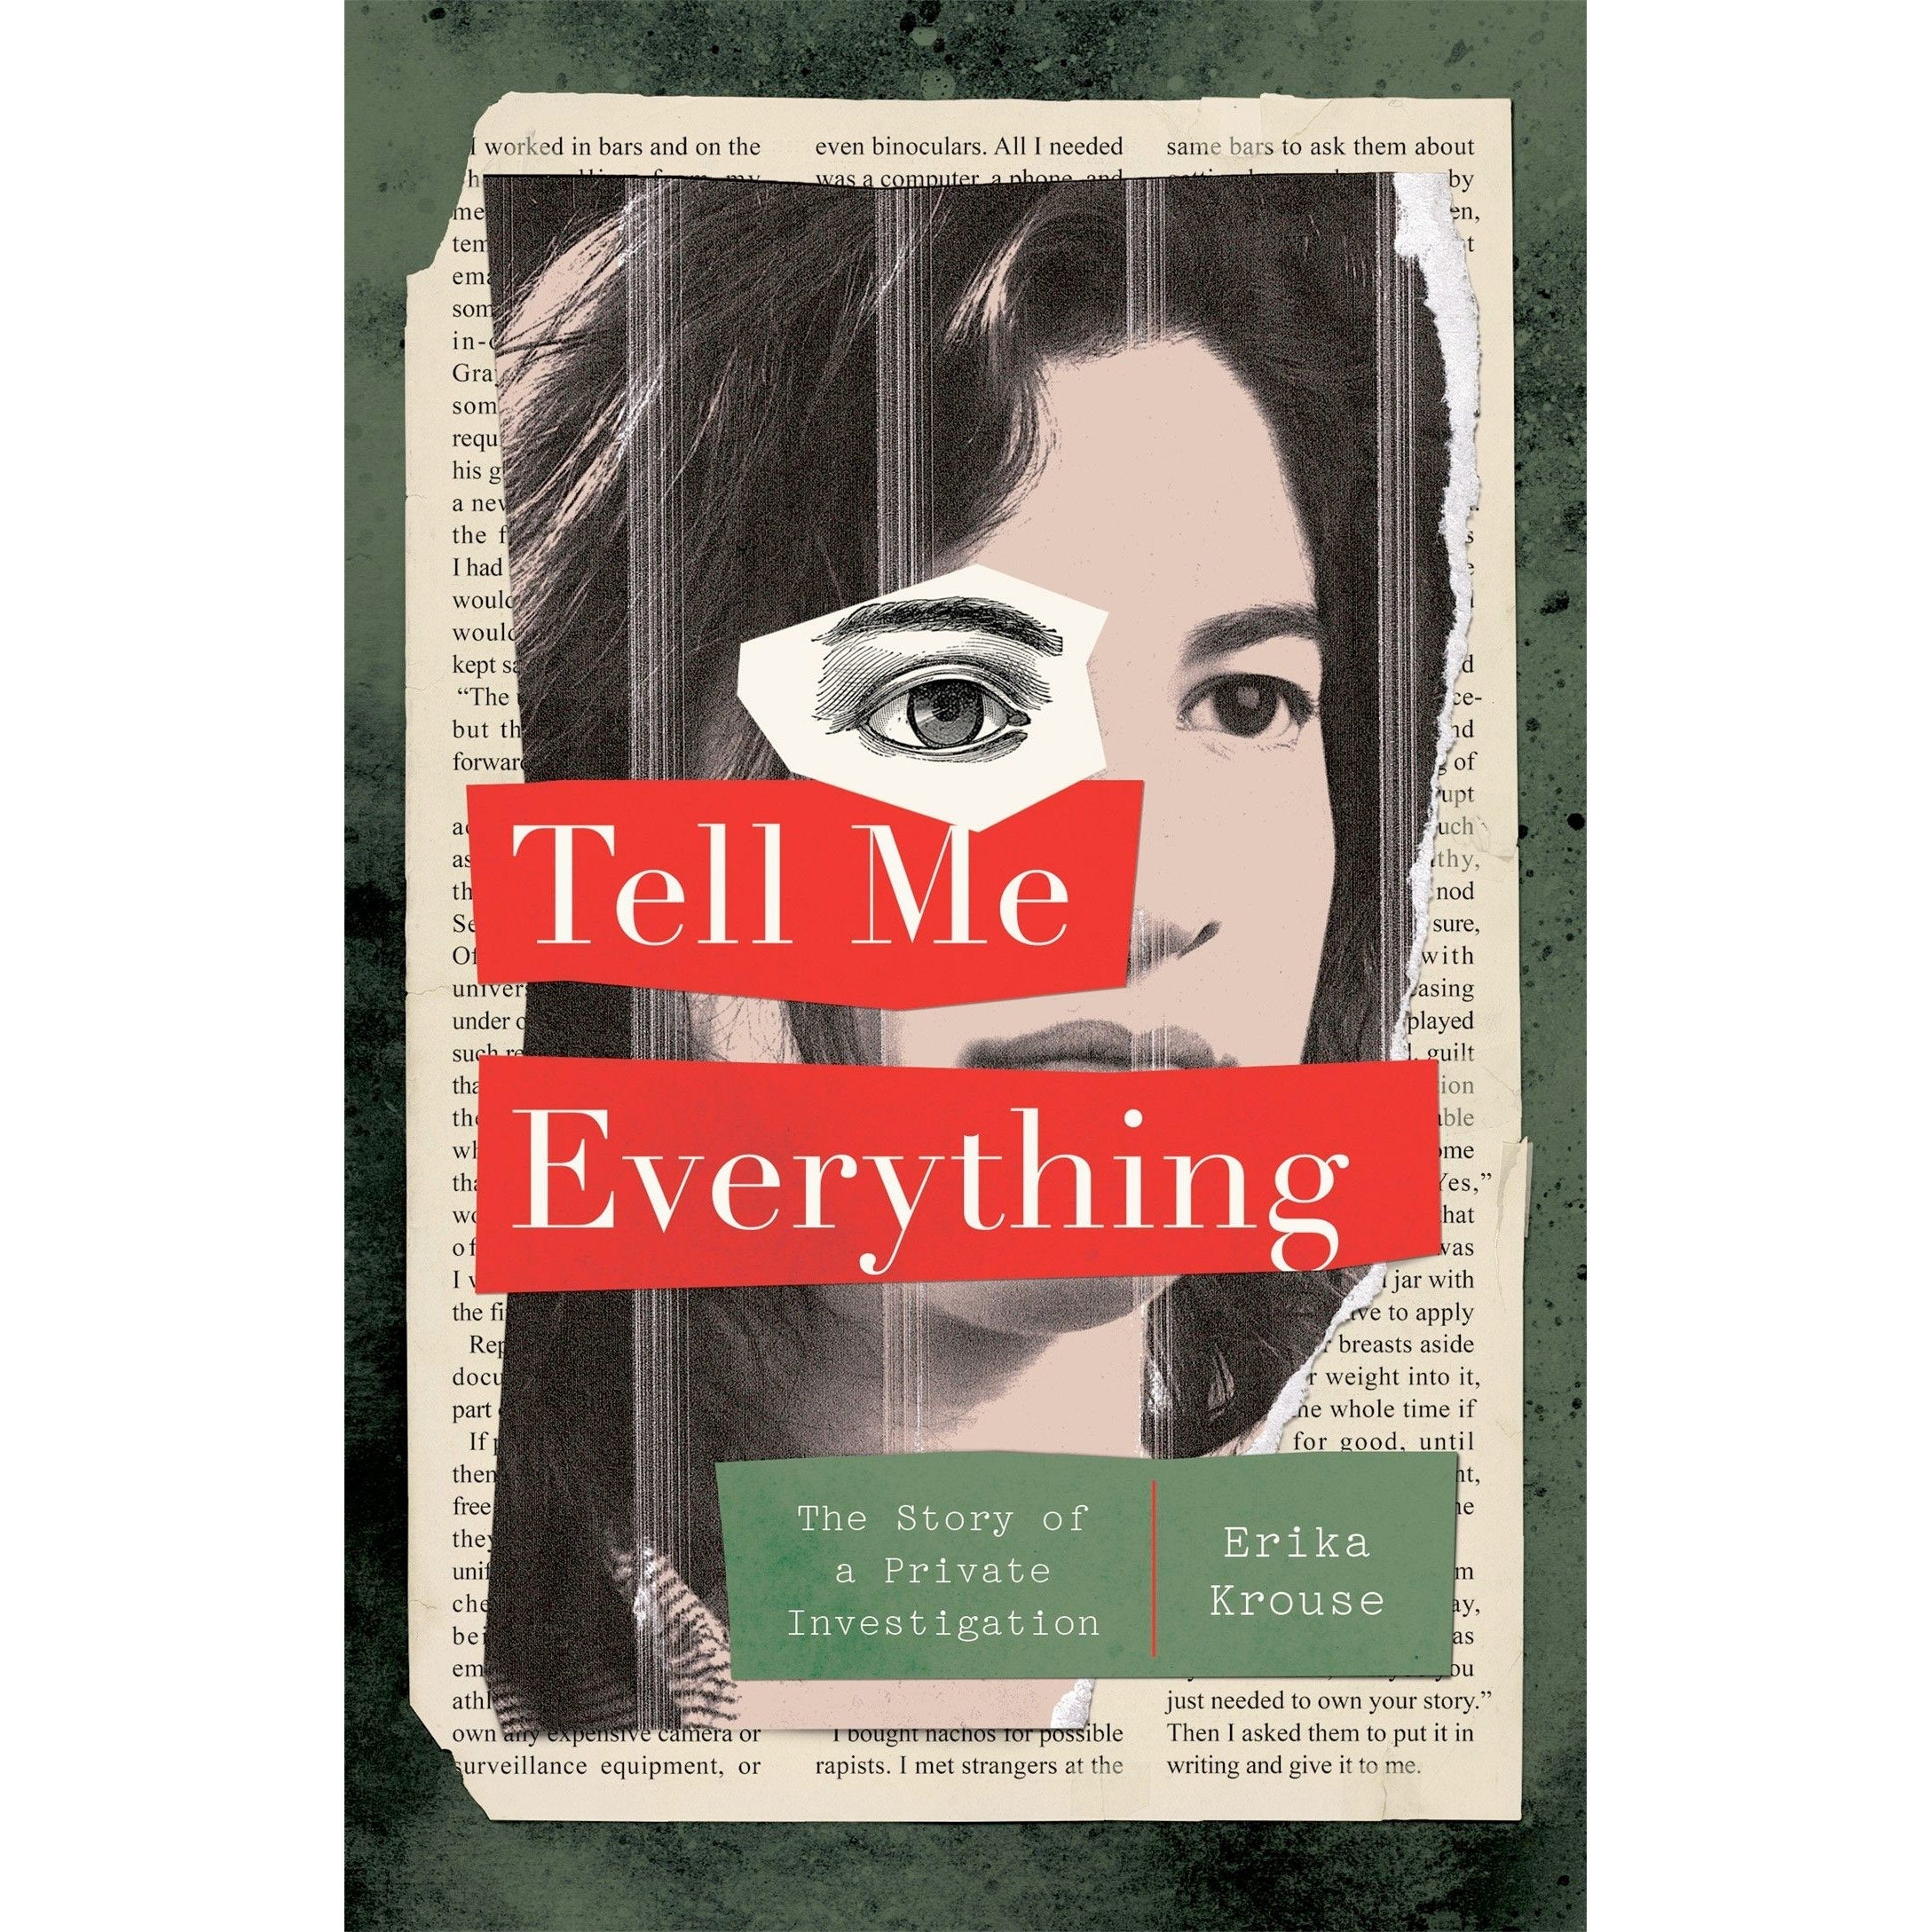 The cover of Tell Me Everything.